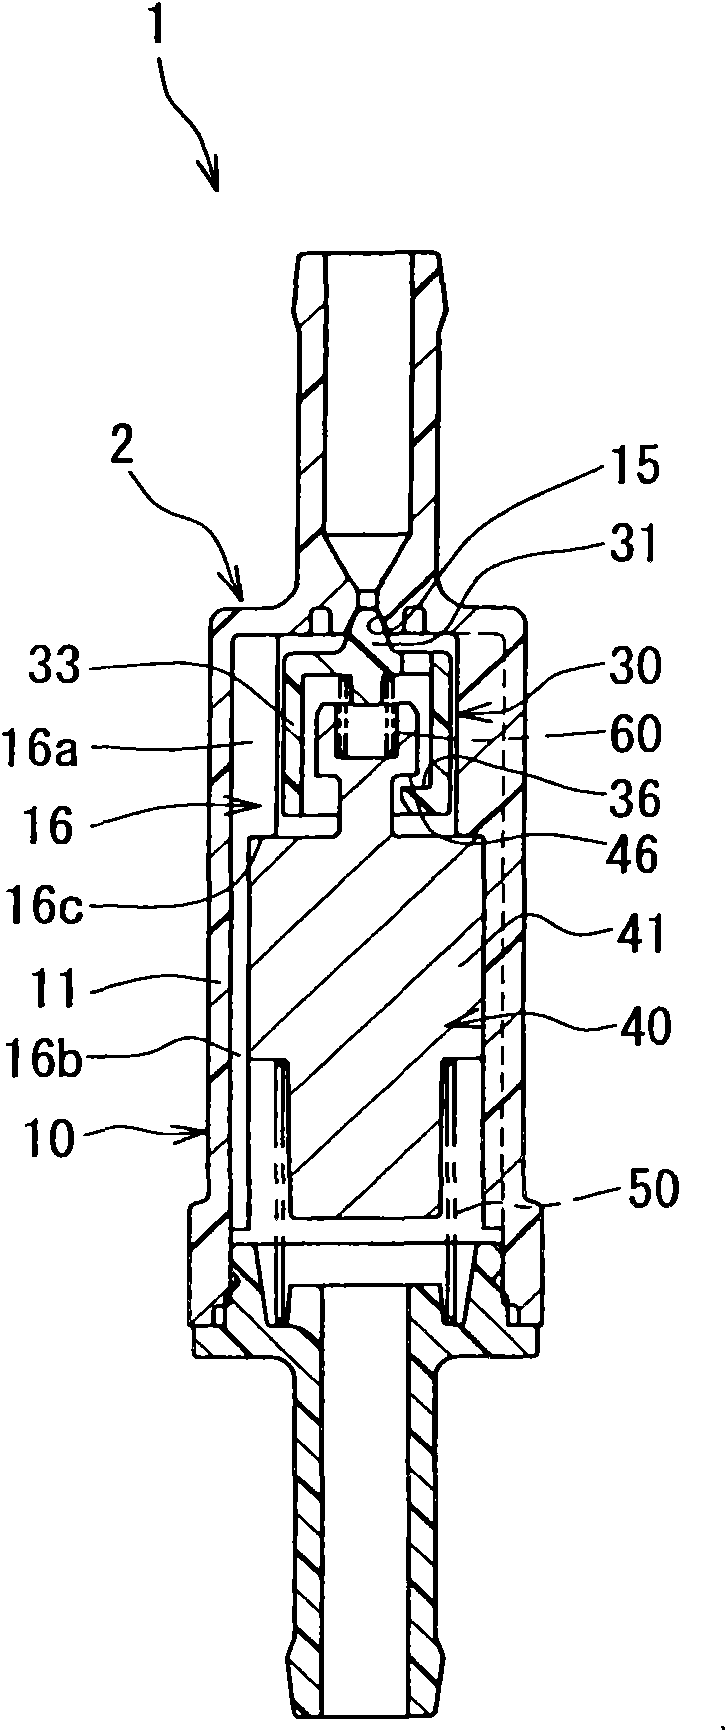 Roll-over safety valve